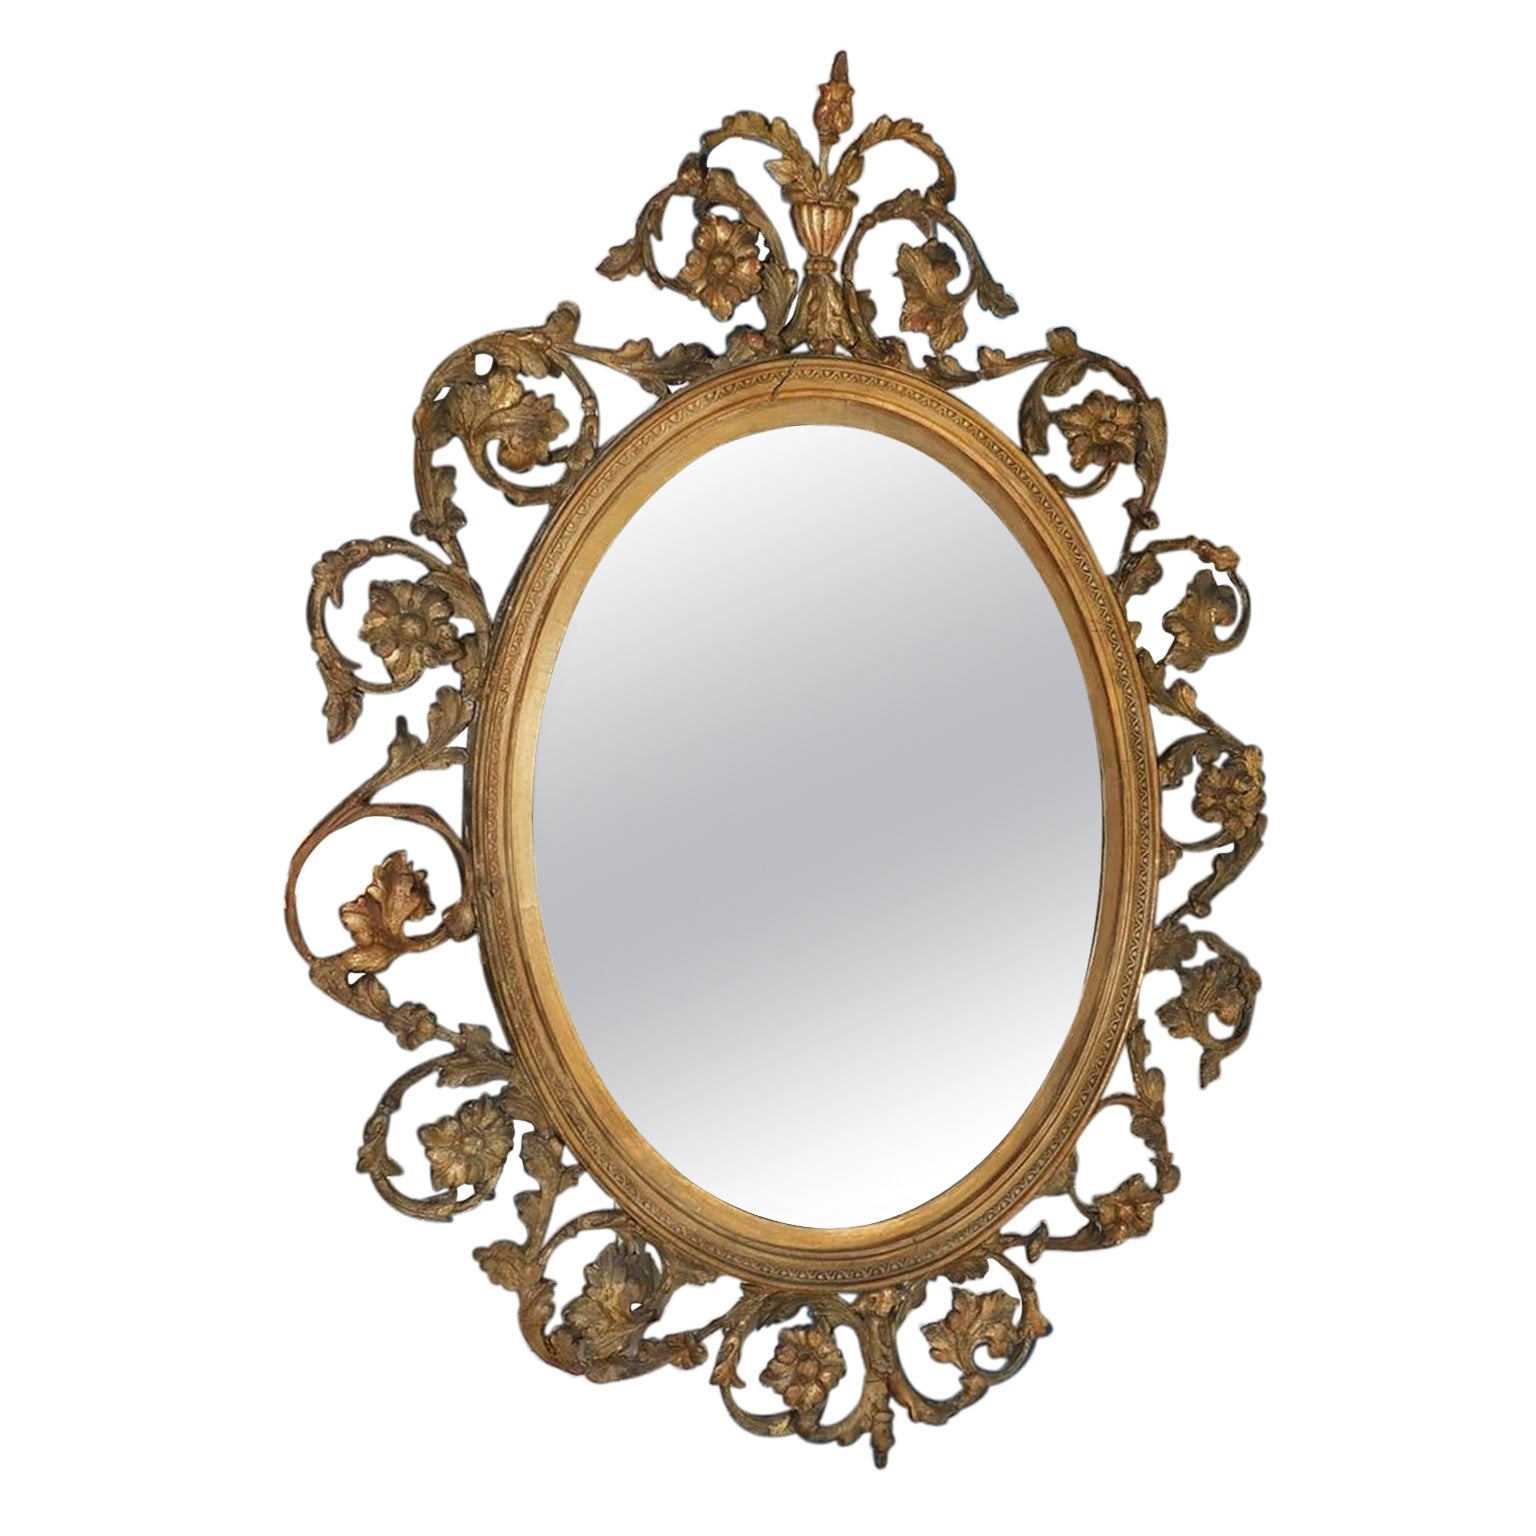 English Oval Gilt Carved Wood and Gesso Scrolled Foliage Wall Mirror, C. 1800 For Sale